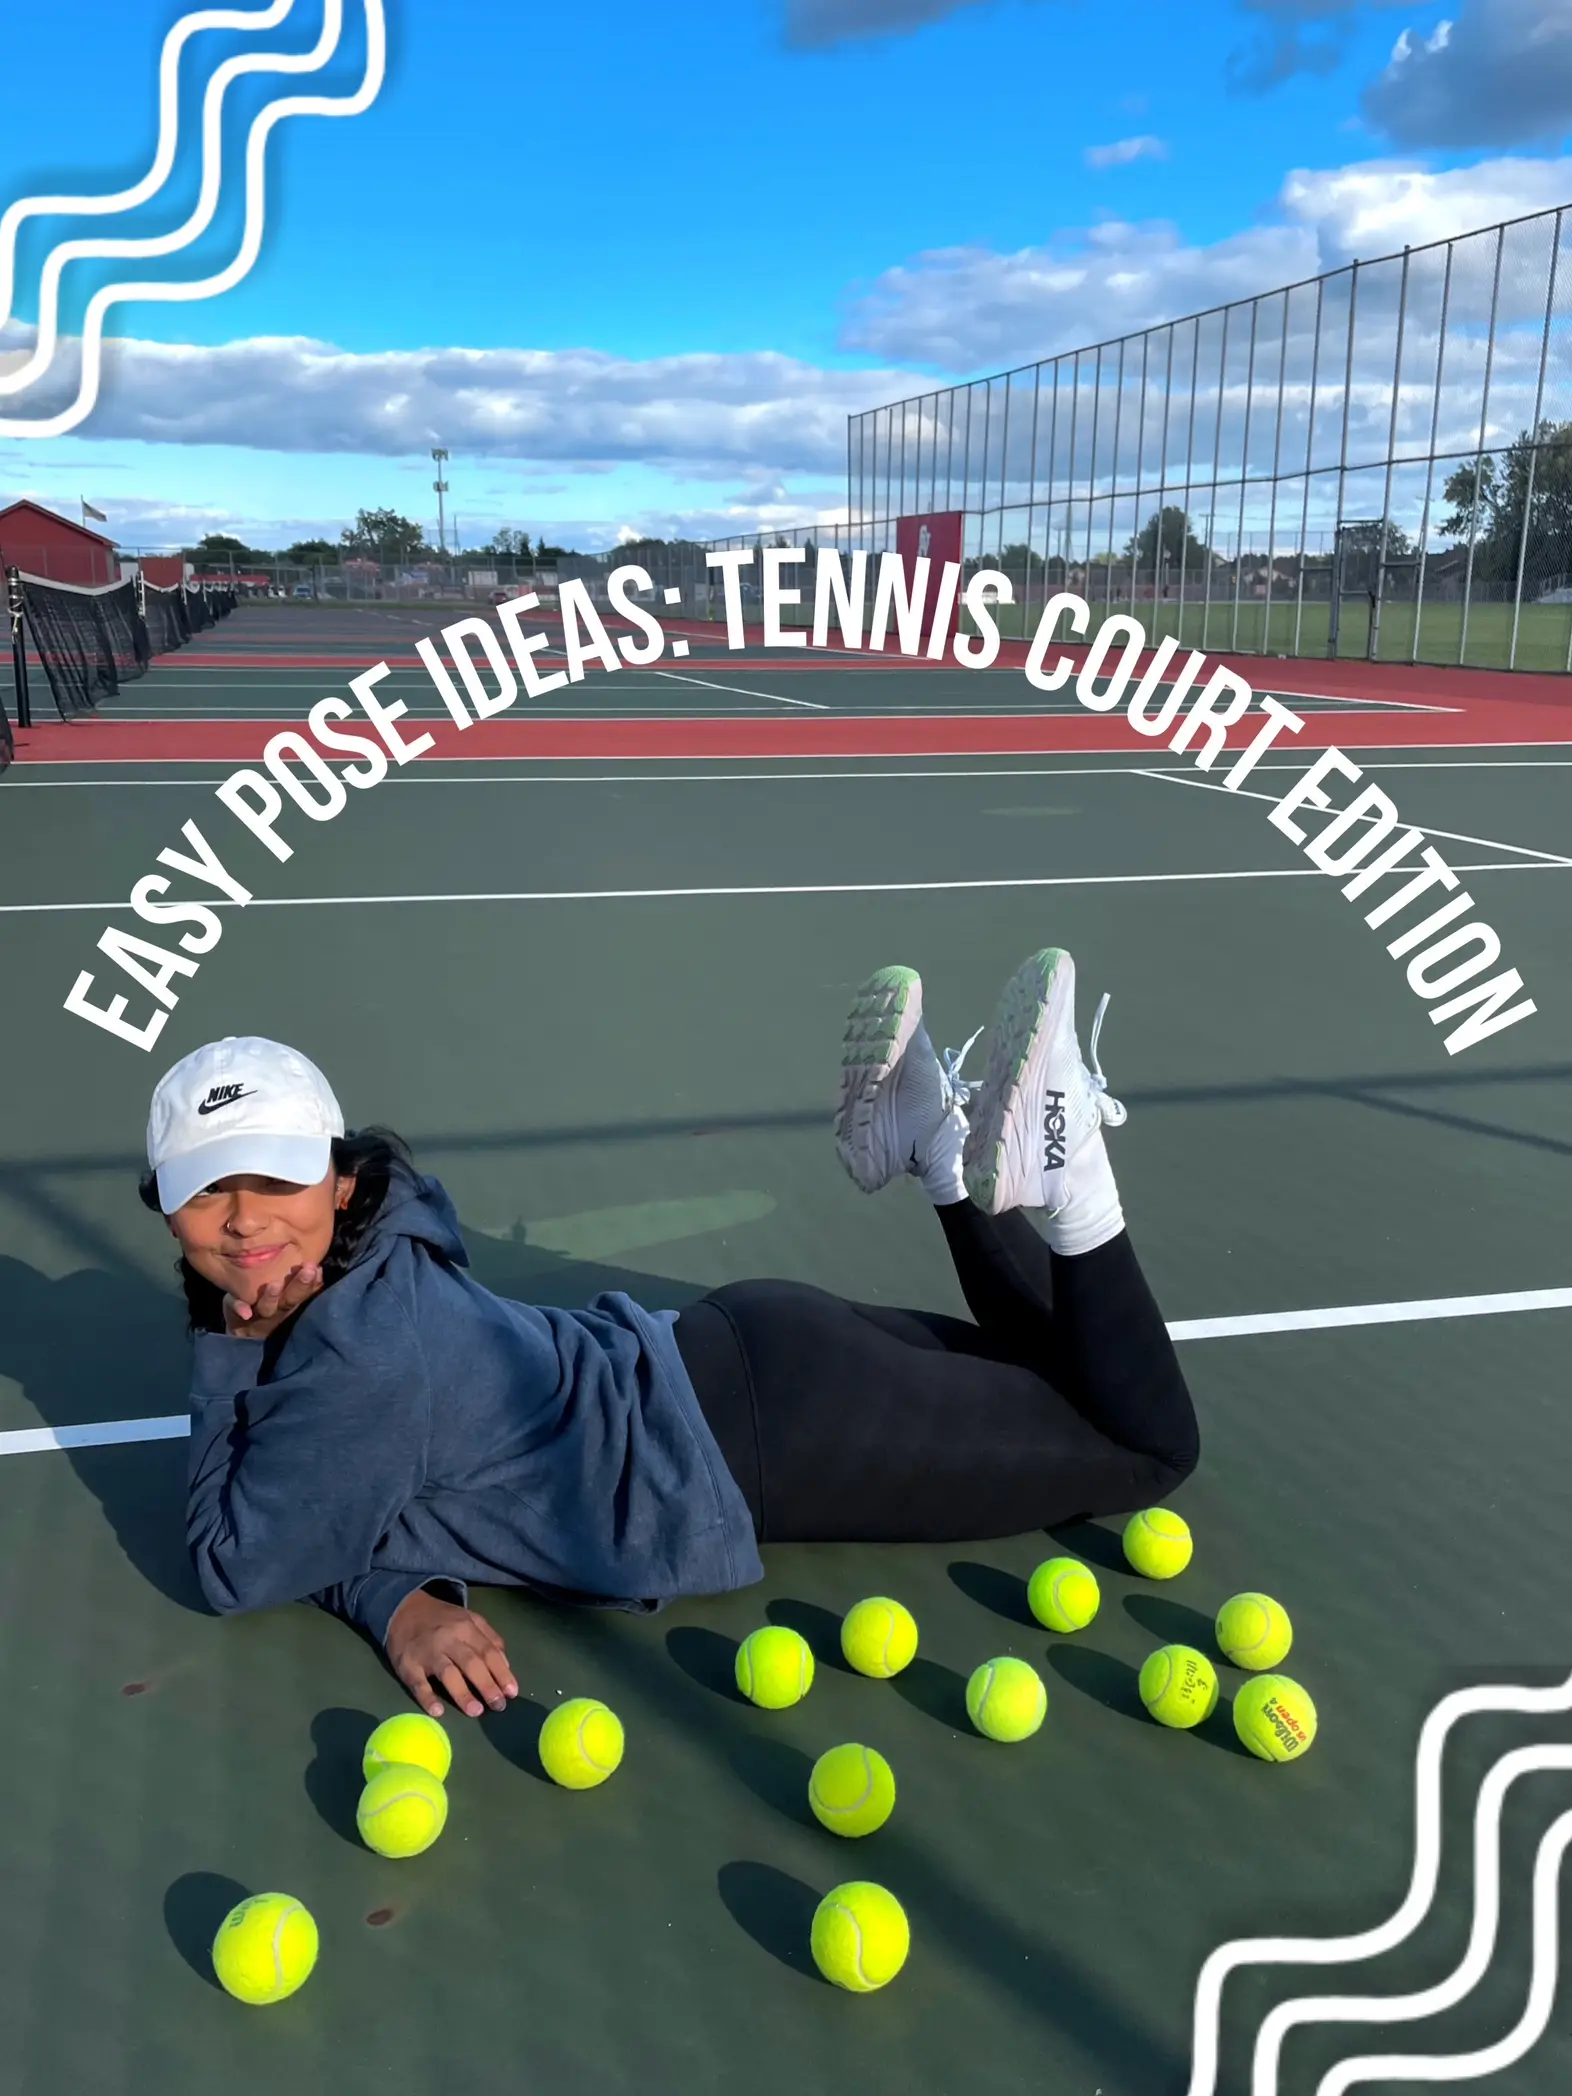 🎾✨ Serve up some serious fashion on and off the court with the